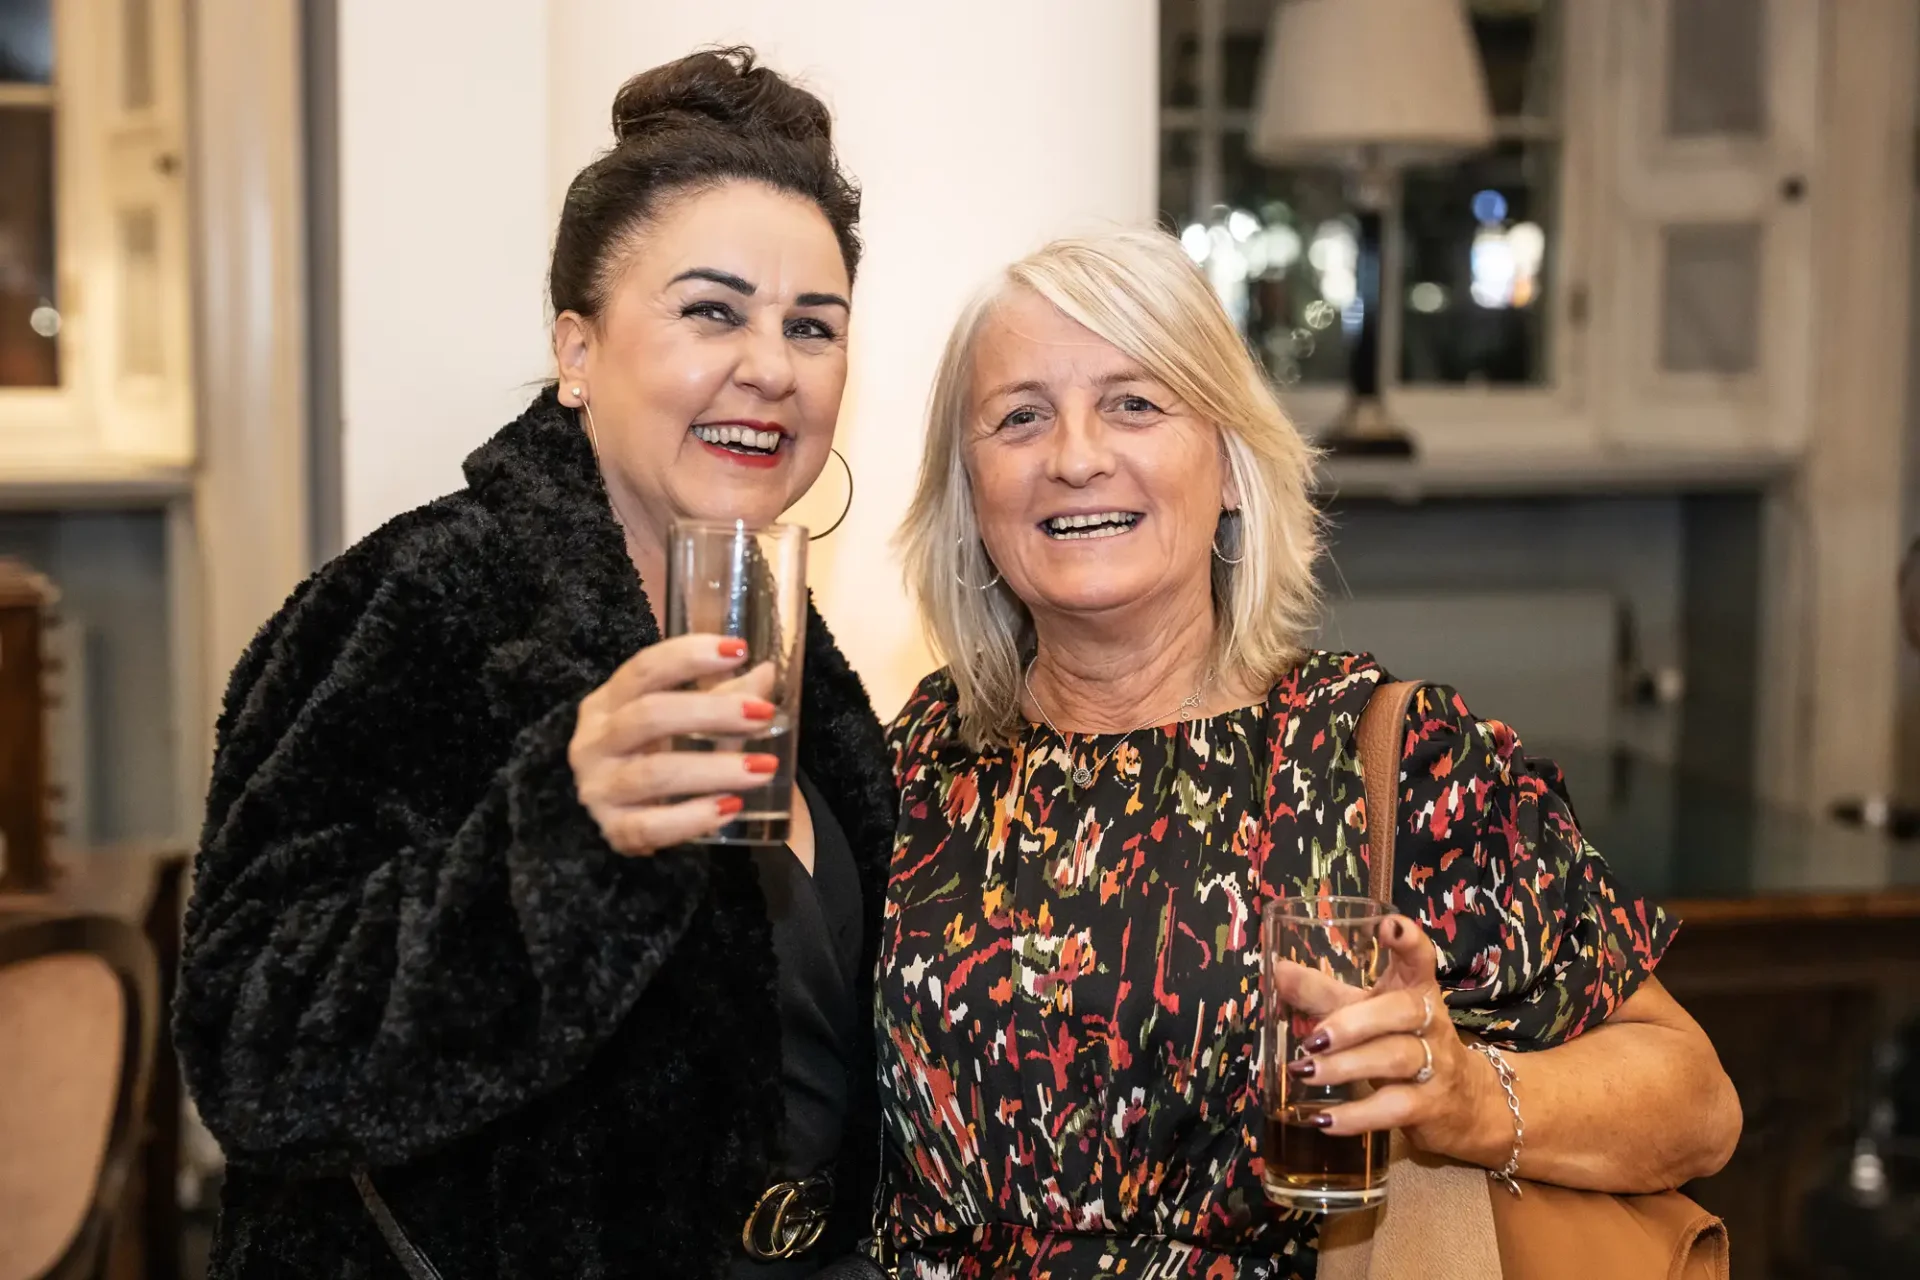 Two women smiling and holding champagne glasses at a social event indoors. one is wearing a black fur coat, and the other a floral dress.